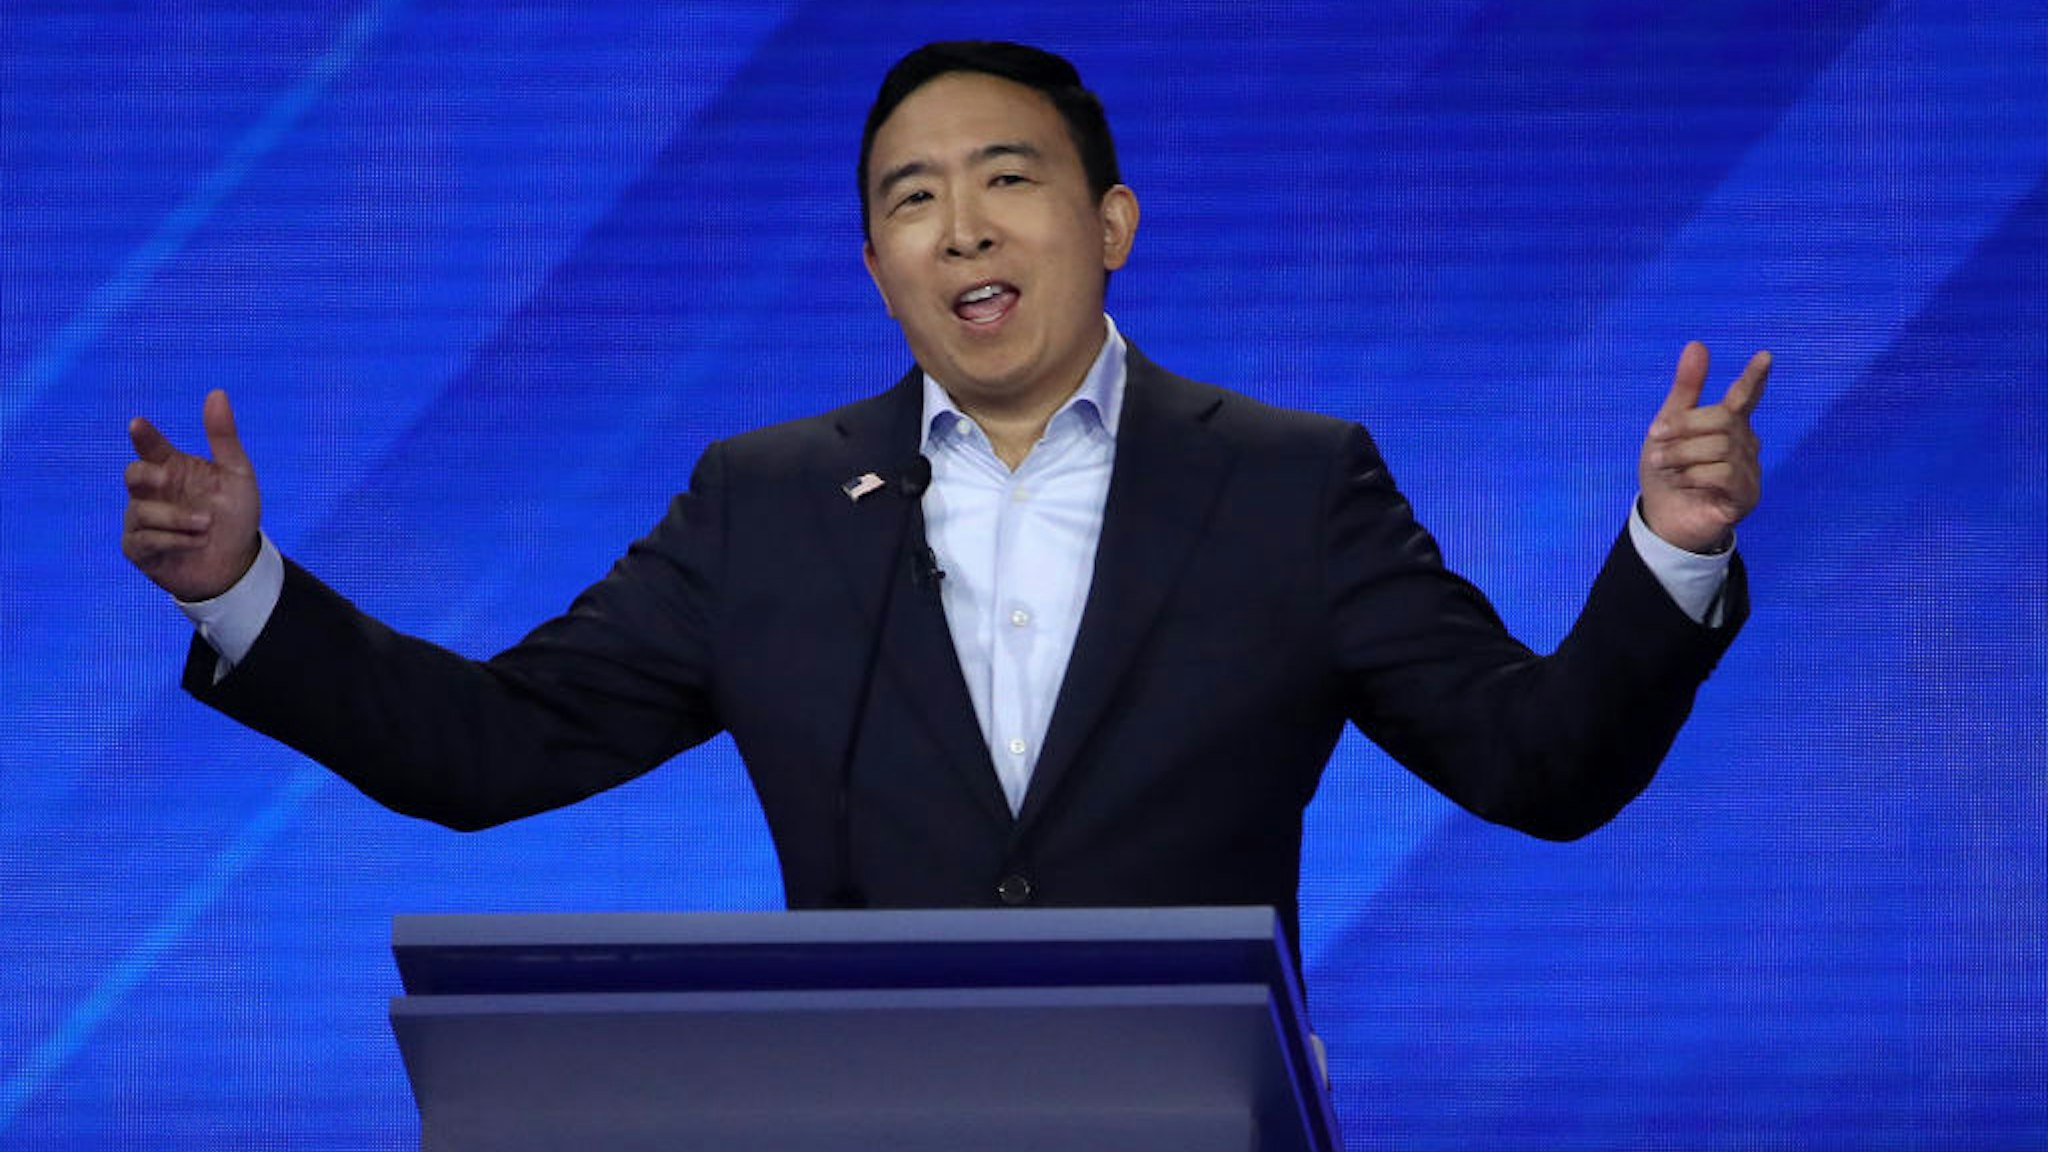 HOUSTON, TEXAS - SEPTEMBER 12: Democratic presidential candidate former tech executive Andrew Yang speaks during the Democratic Presidential Debate at Texas Southern University's Health and PE Center on September 12, 2019 in Houston, Texas. Ten Democratic presidential hopefuls were chosen from the larger field of candidates to participate in the debate hosted by ABC News in partnership with Univision. (Photo by Win McNamee/Getty Images)